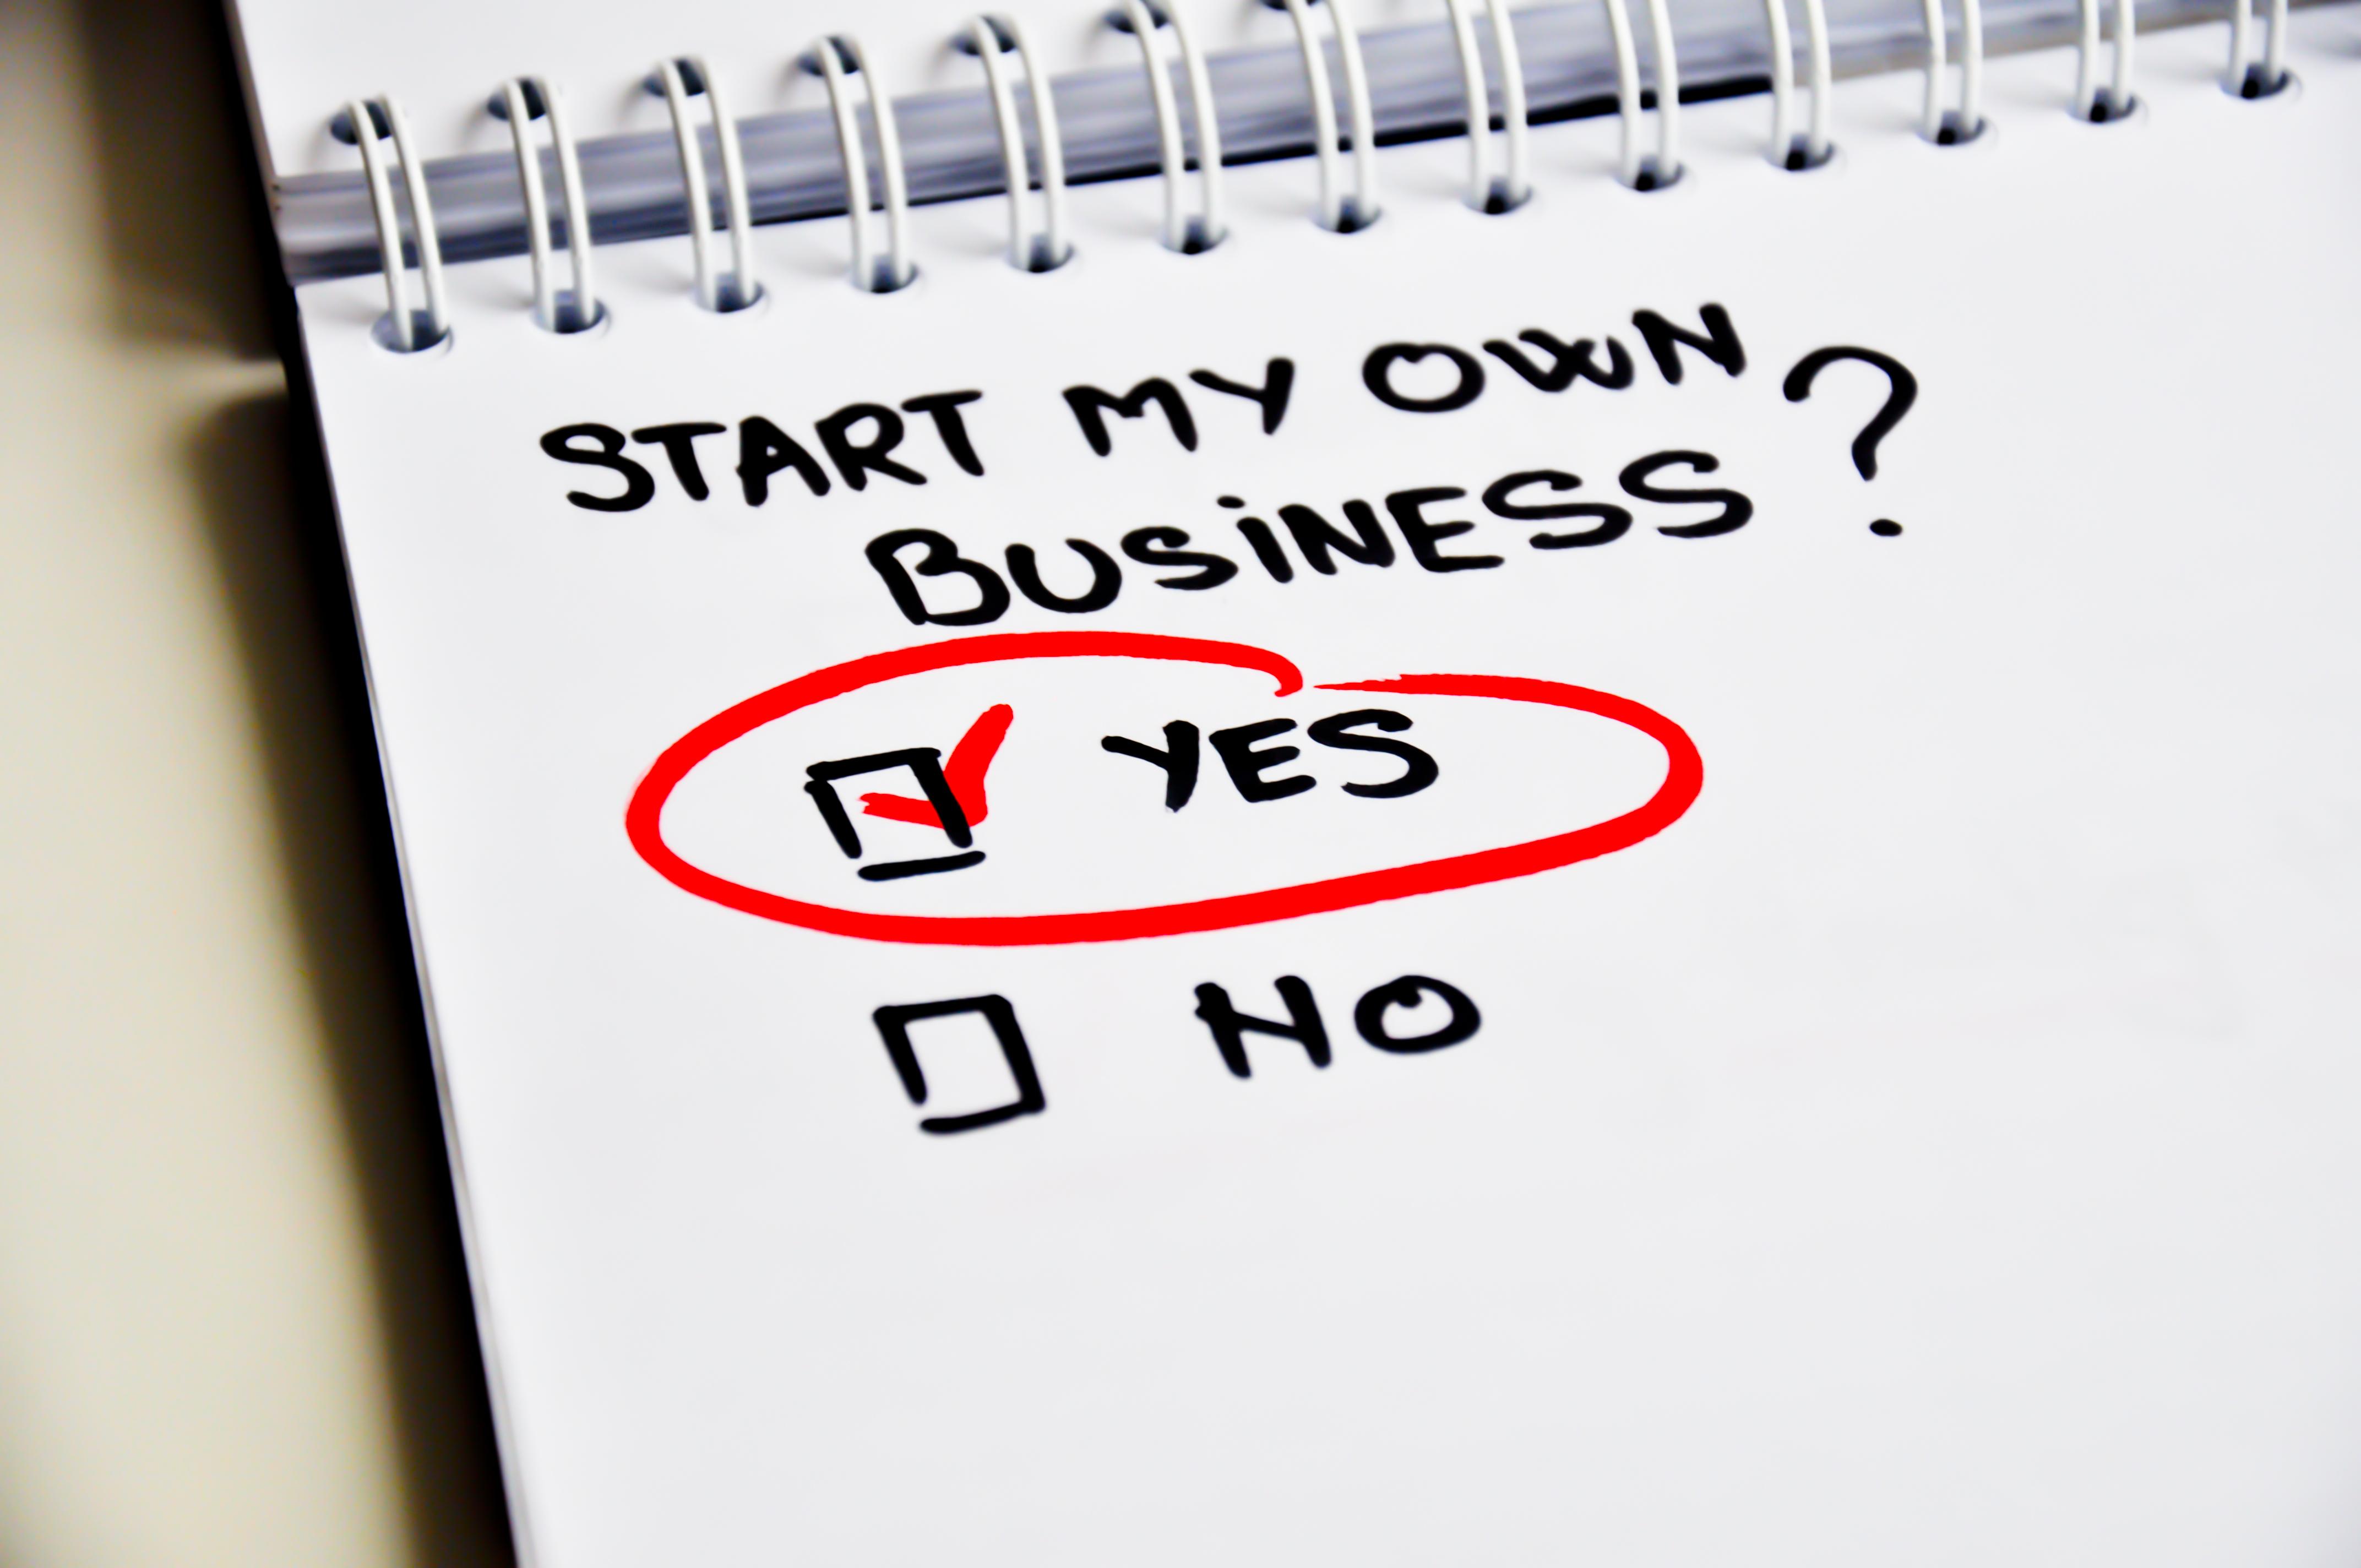 Mine own business. Start own Business. My own Business. How to start my own Business. Easy steps to start your Business.